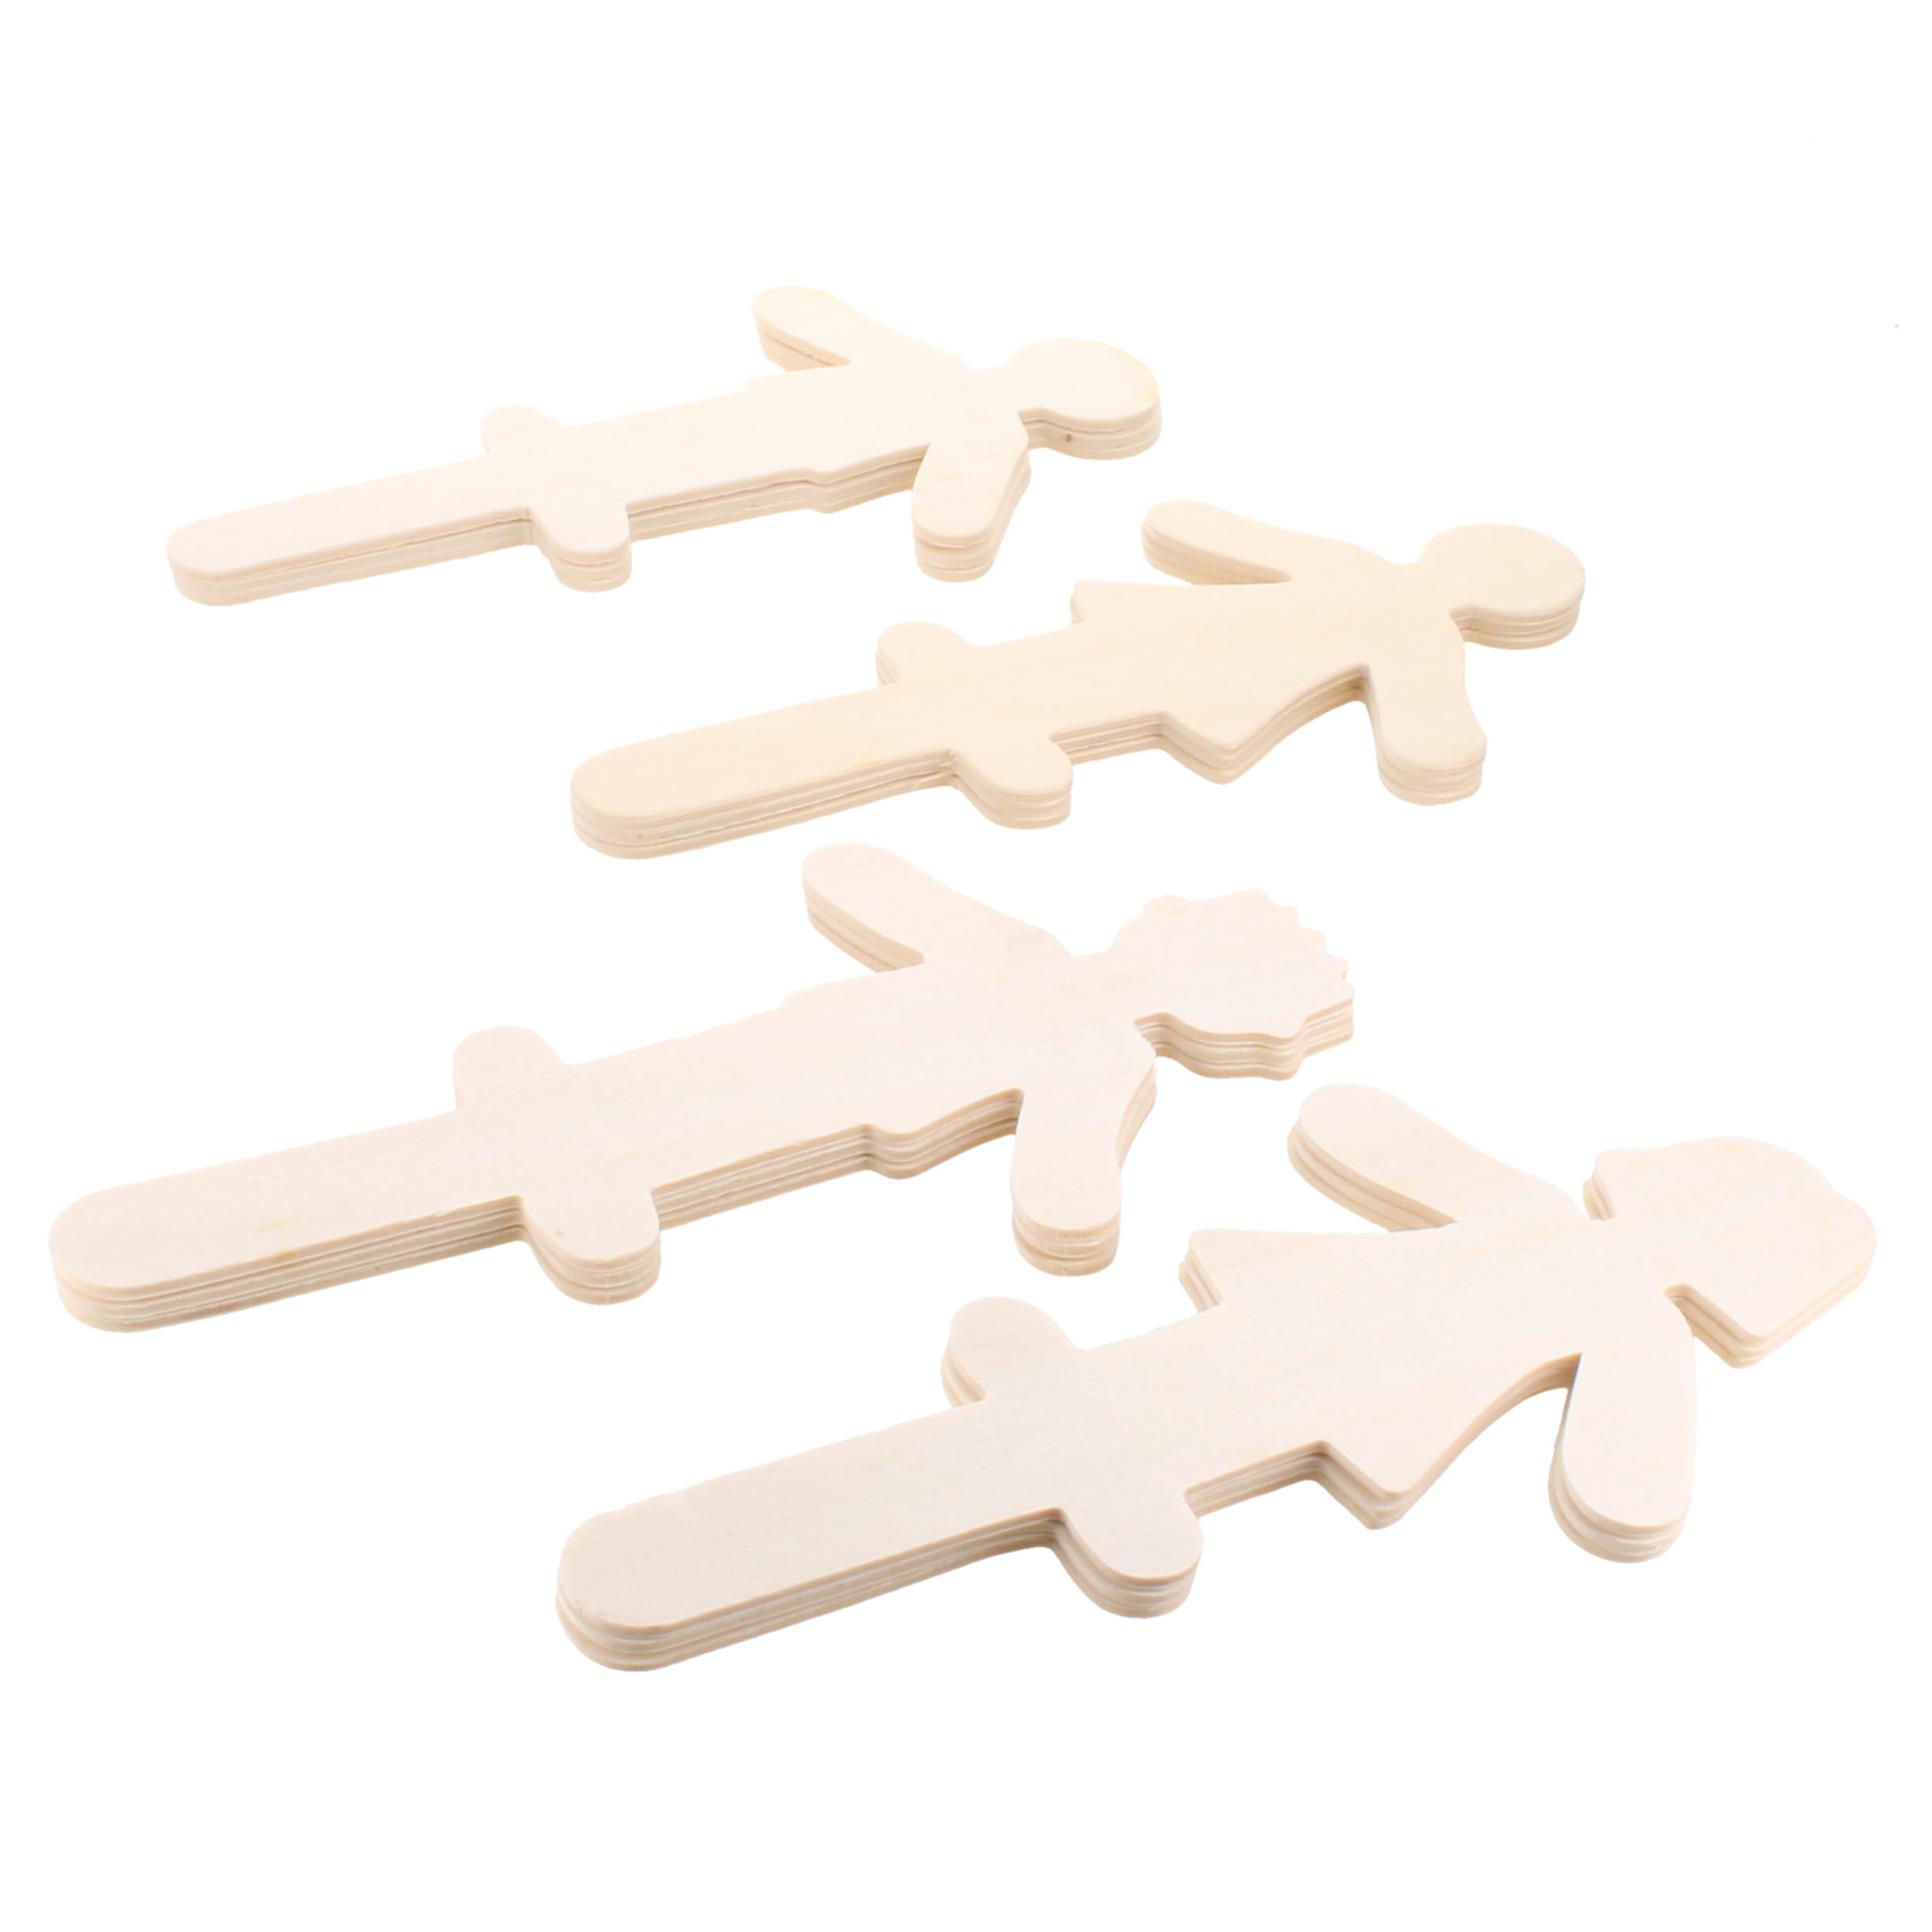 Wooden People Sticks - pack of 12